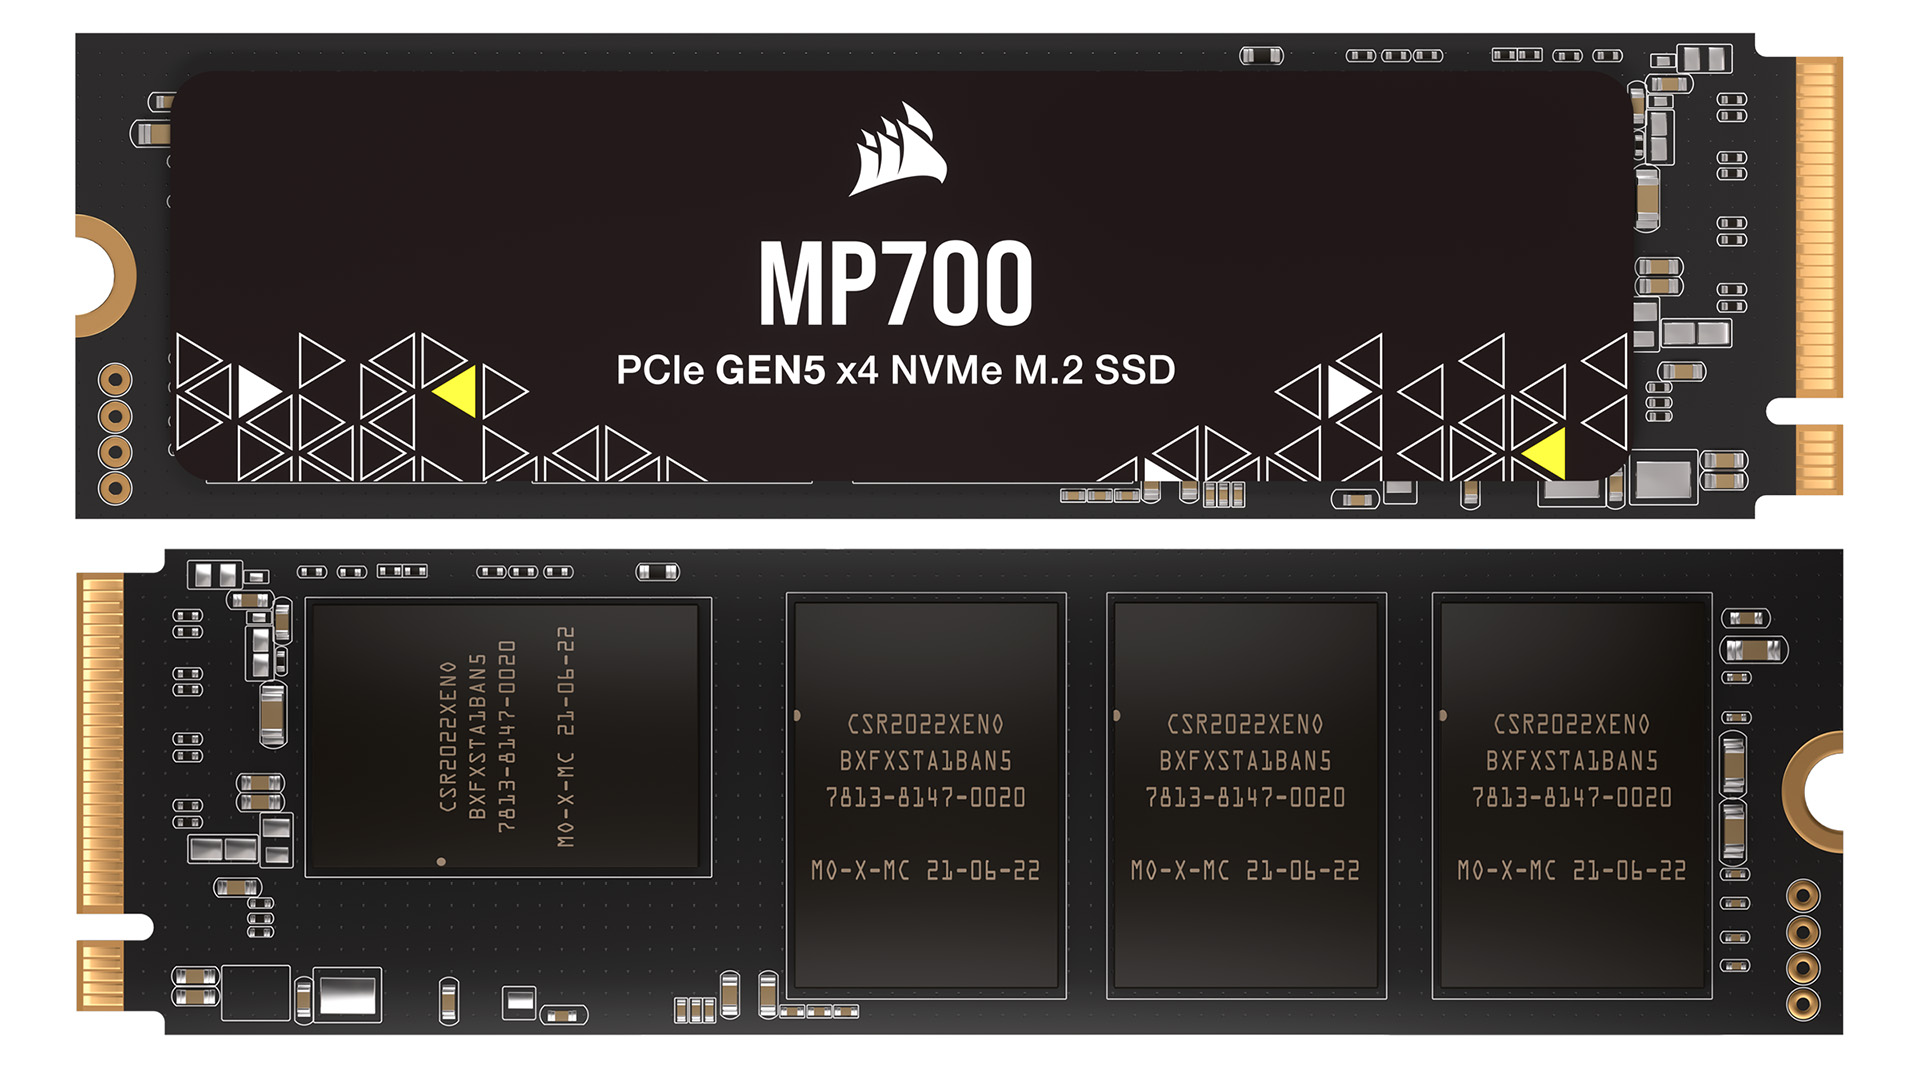 New Corsair MP700 PCIe 5 SSD launches with lightning-quick speeds